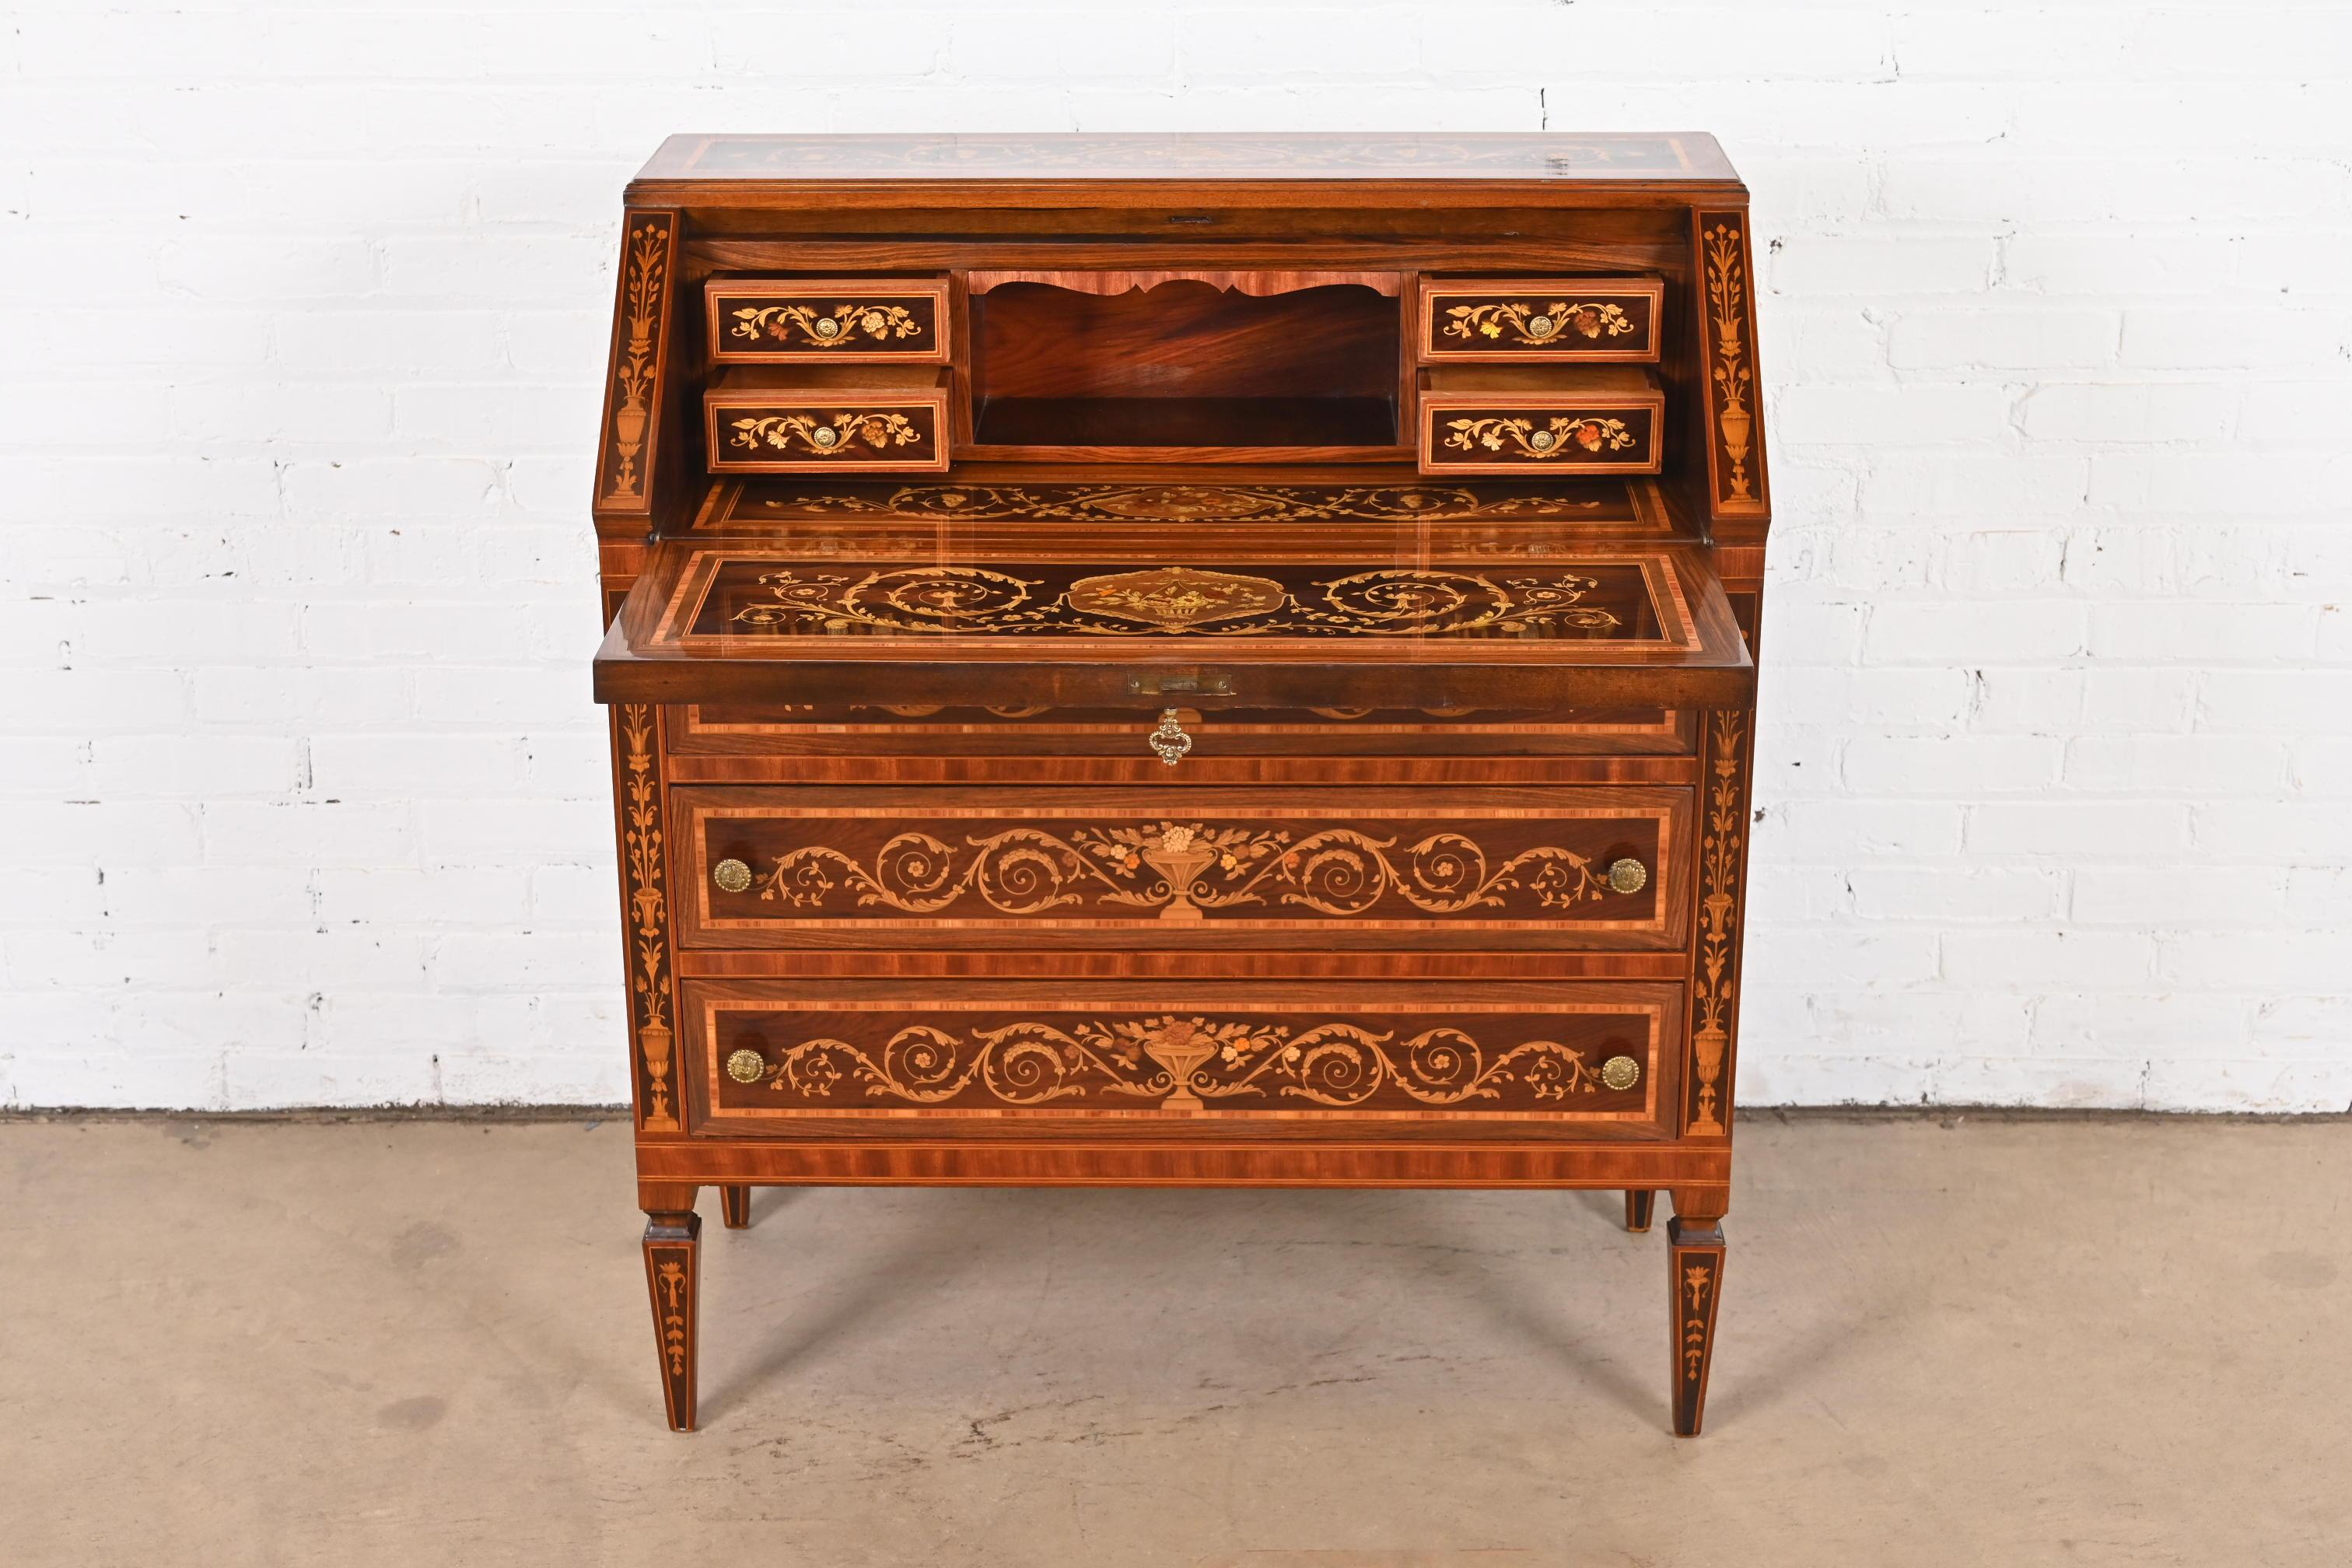 Italian Neoclassical Rosewood Inlaid Marquetry Slant Front Secretary Desk 1